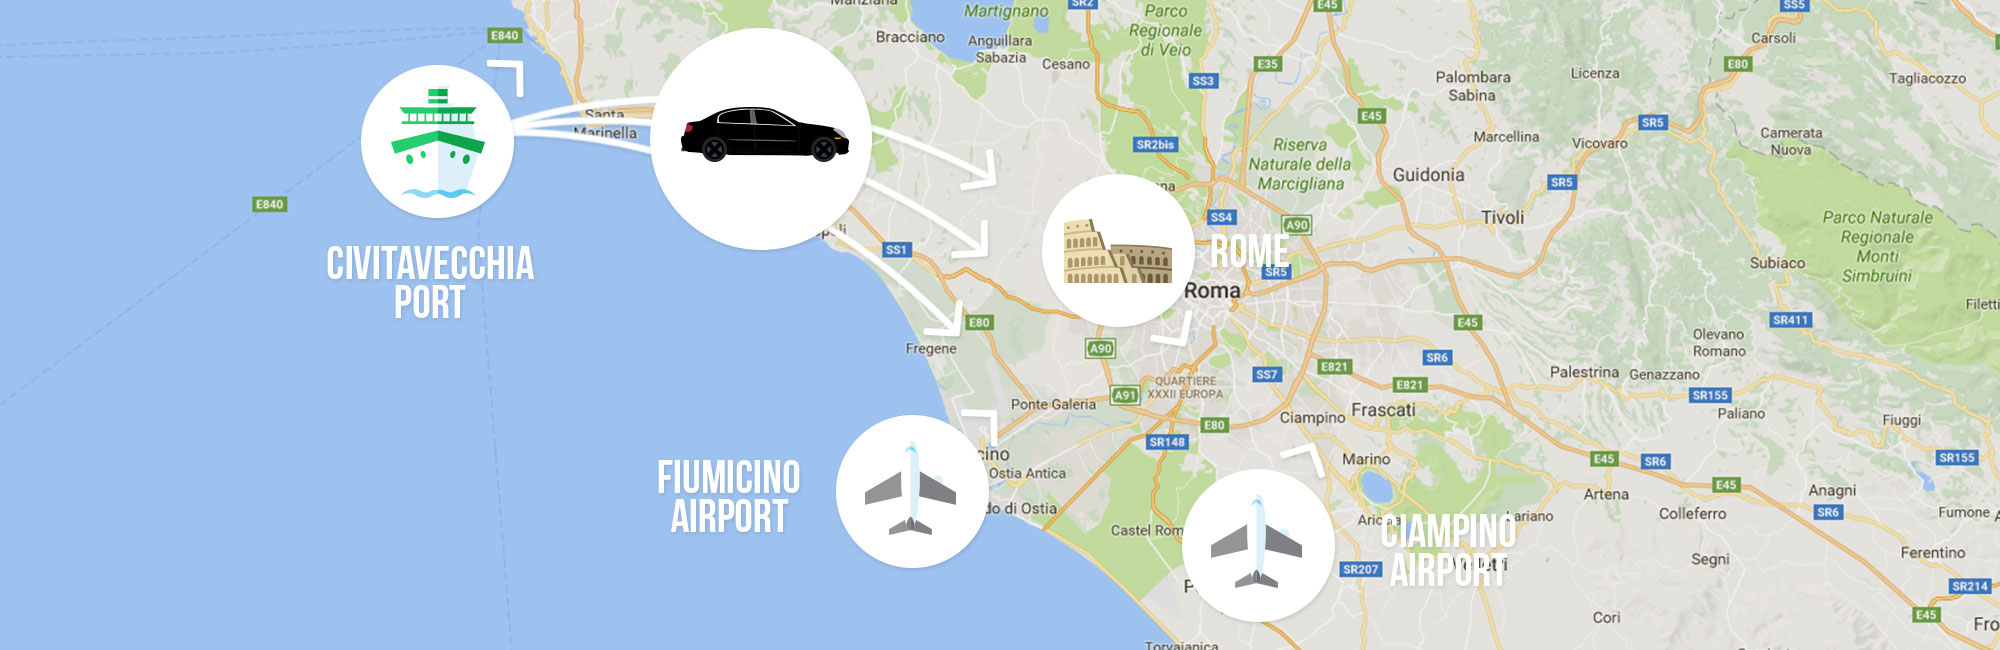 NCC Airport Services Map